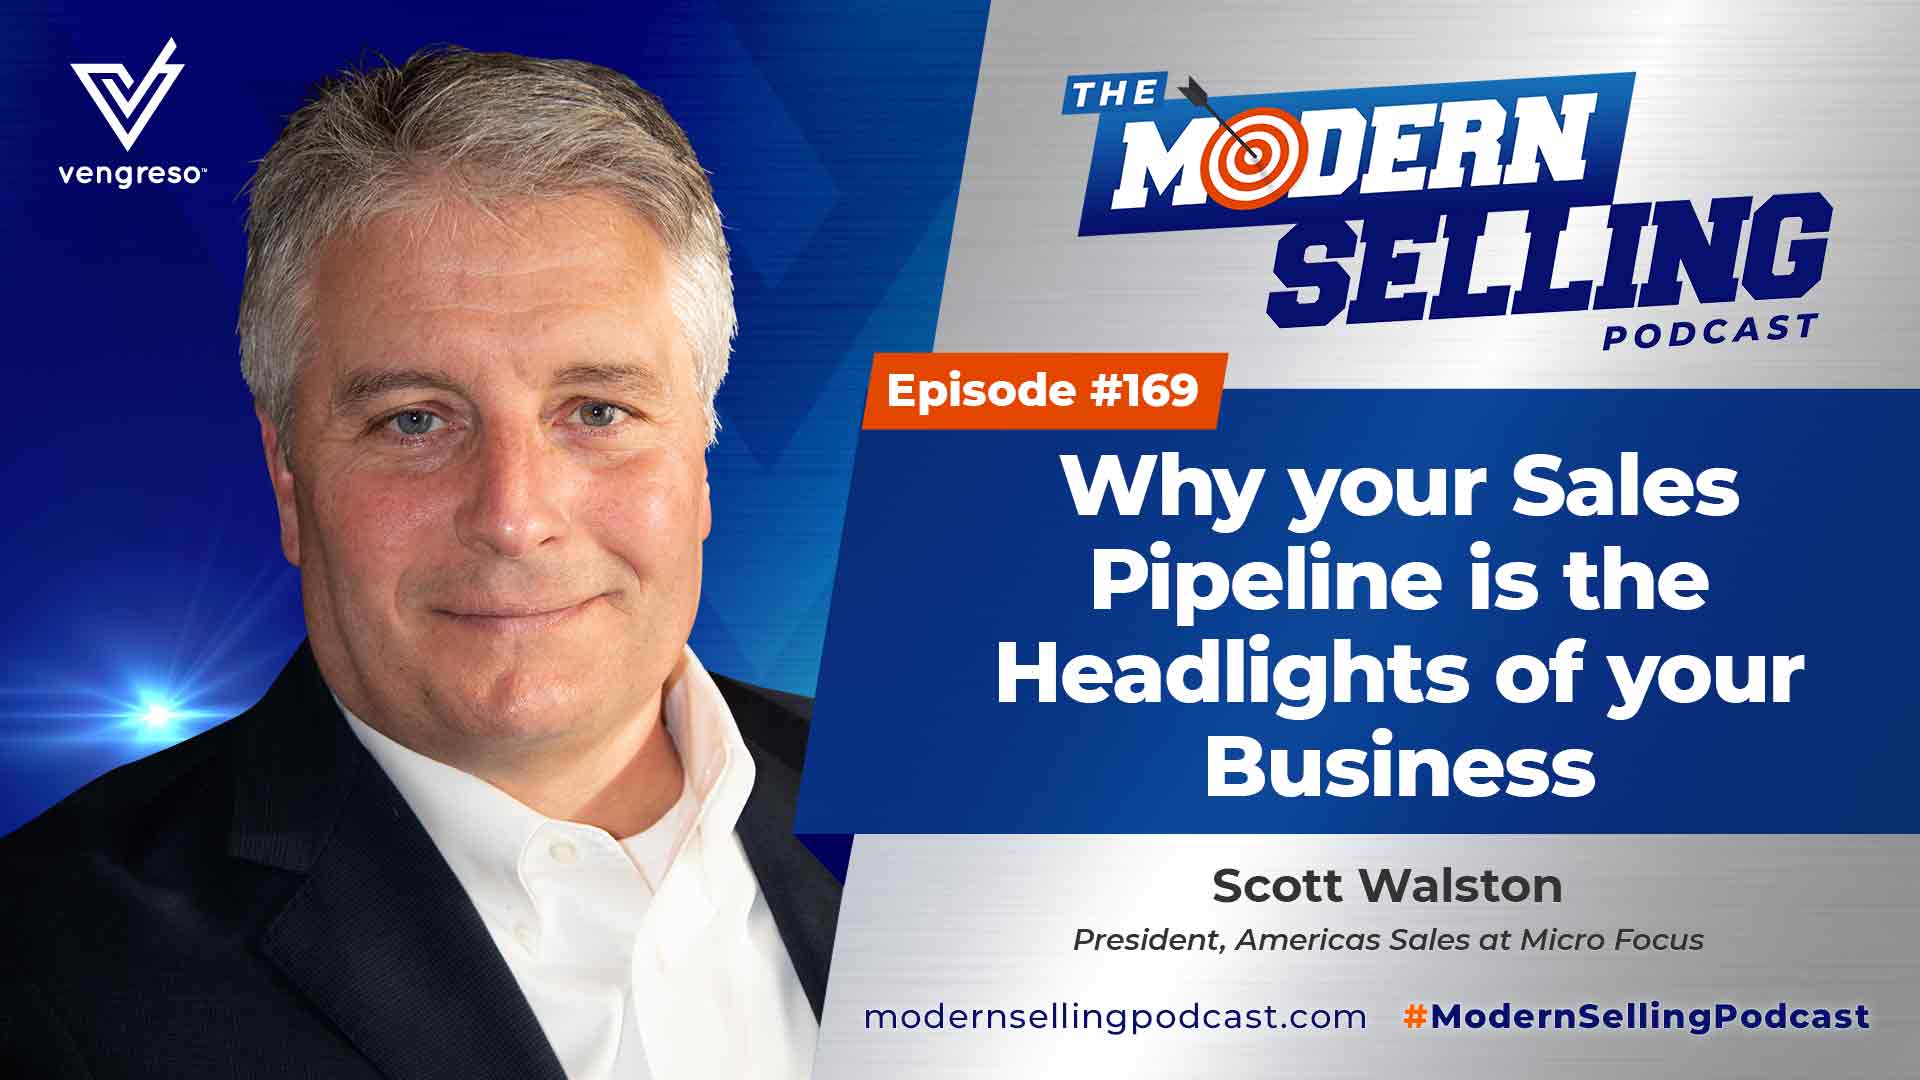 Why your Sales Pipeline is the Headlights of your Business with Scott Walston, #169